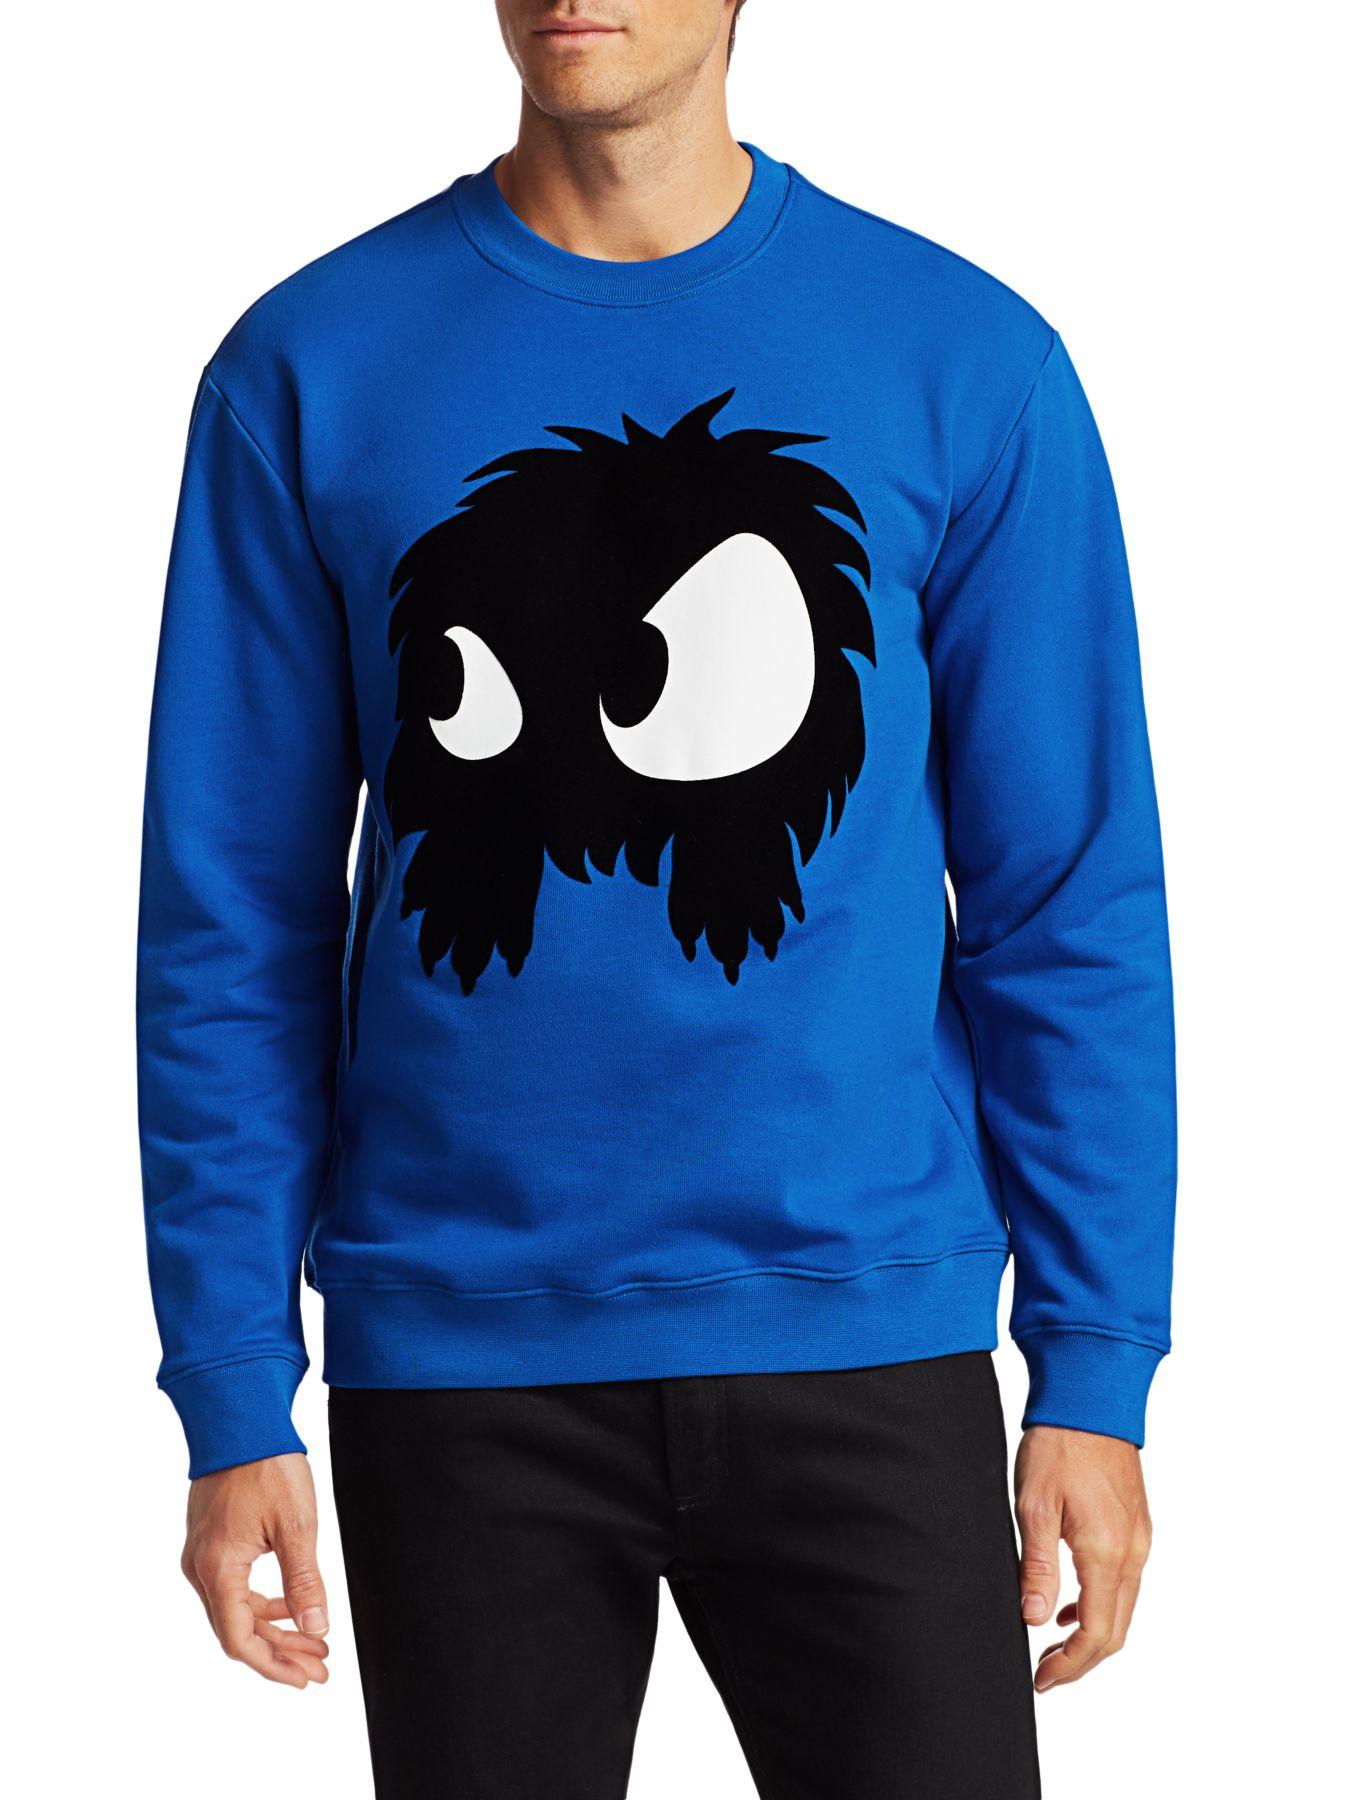 McQ Cotton Monster Pullover Sweatshirt in Blue for Men - Lyst